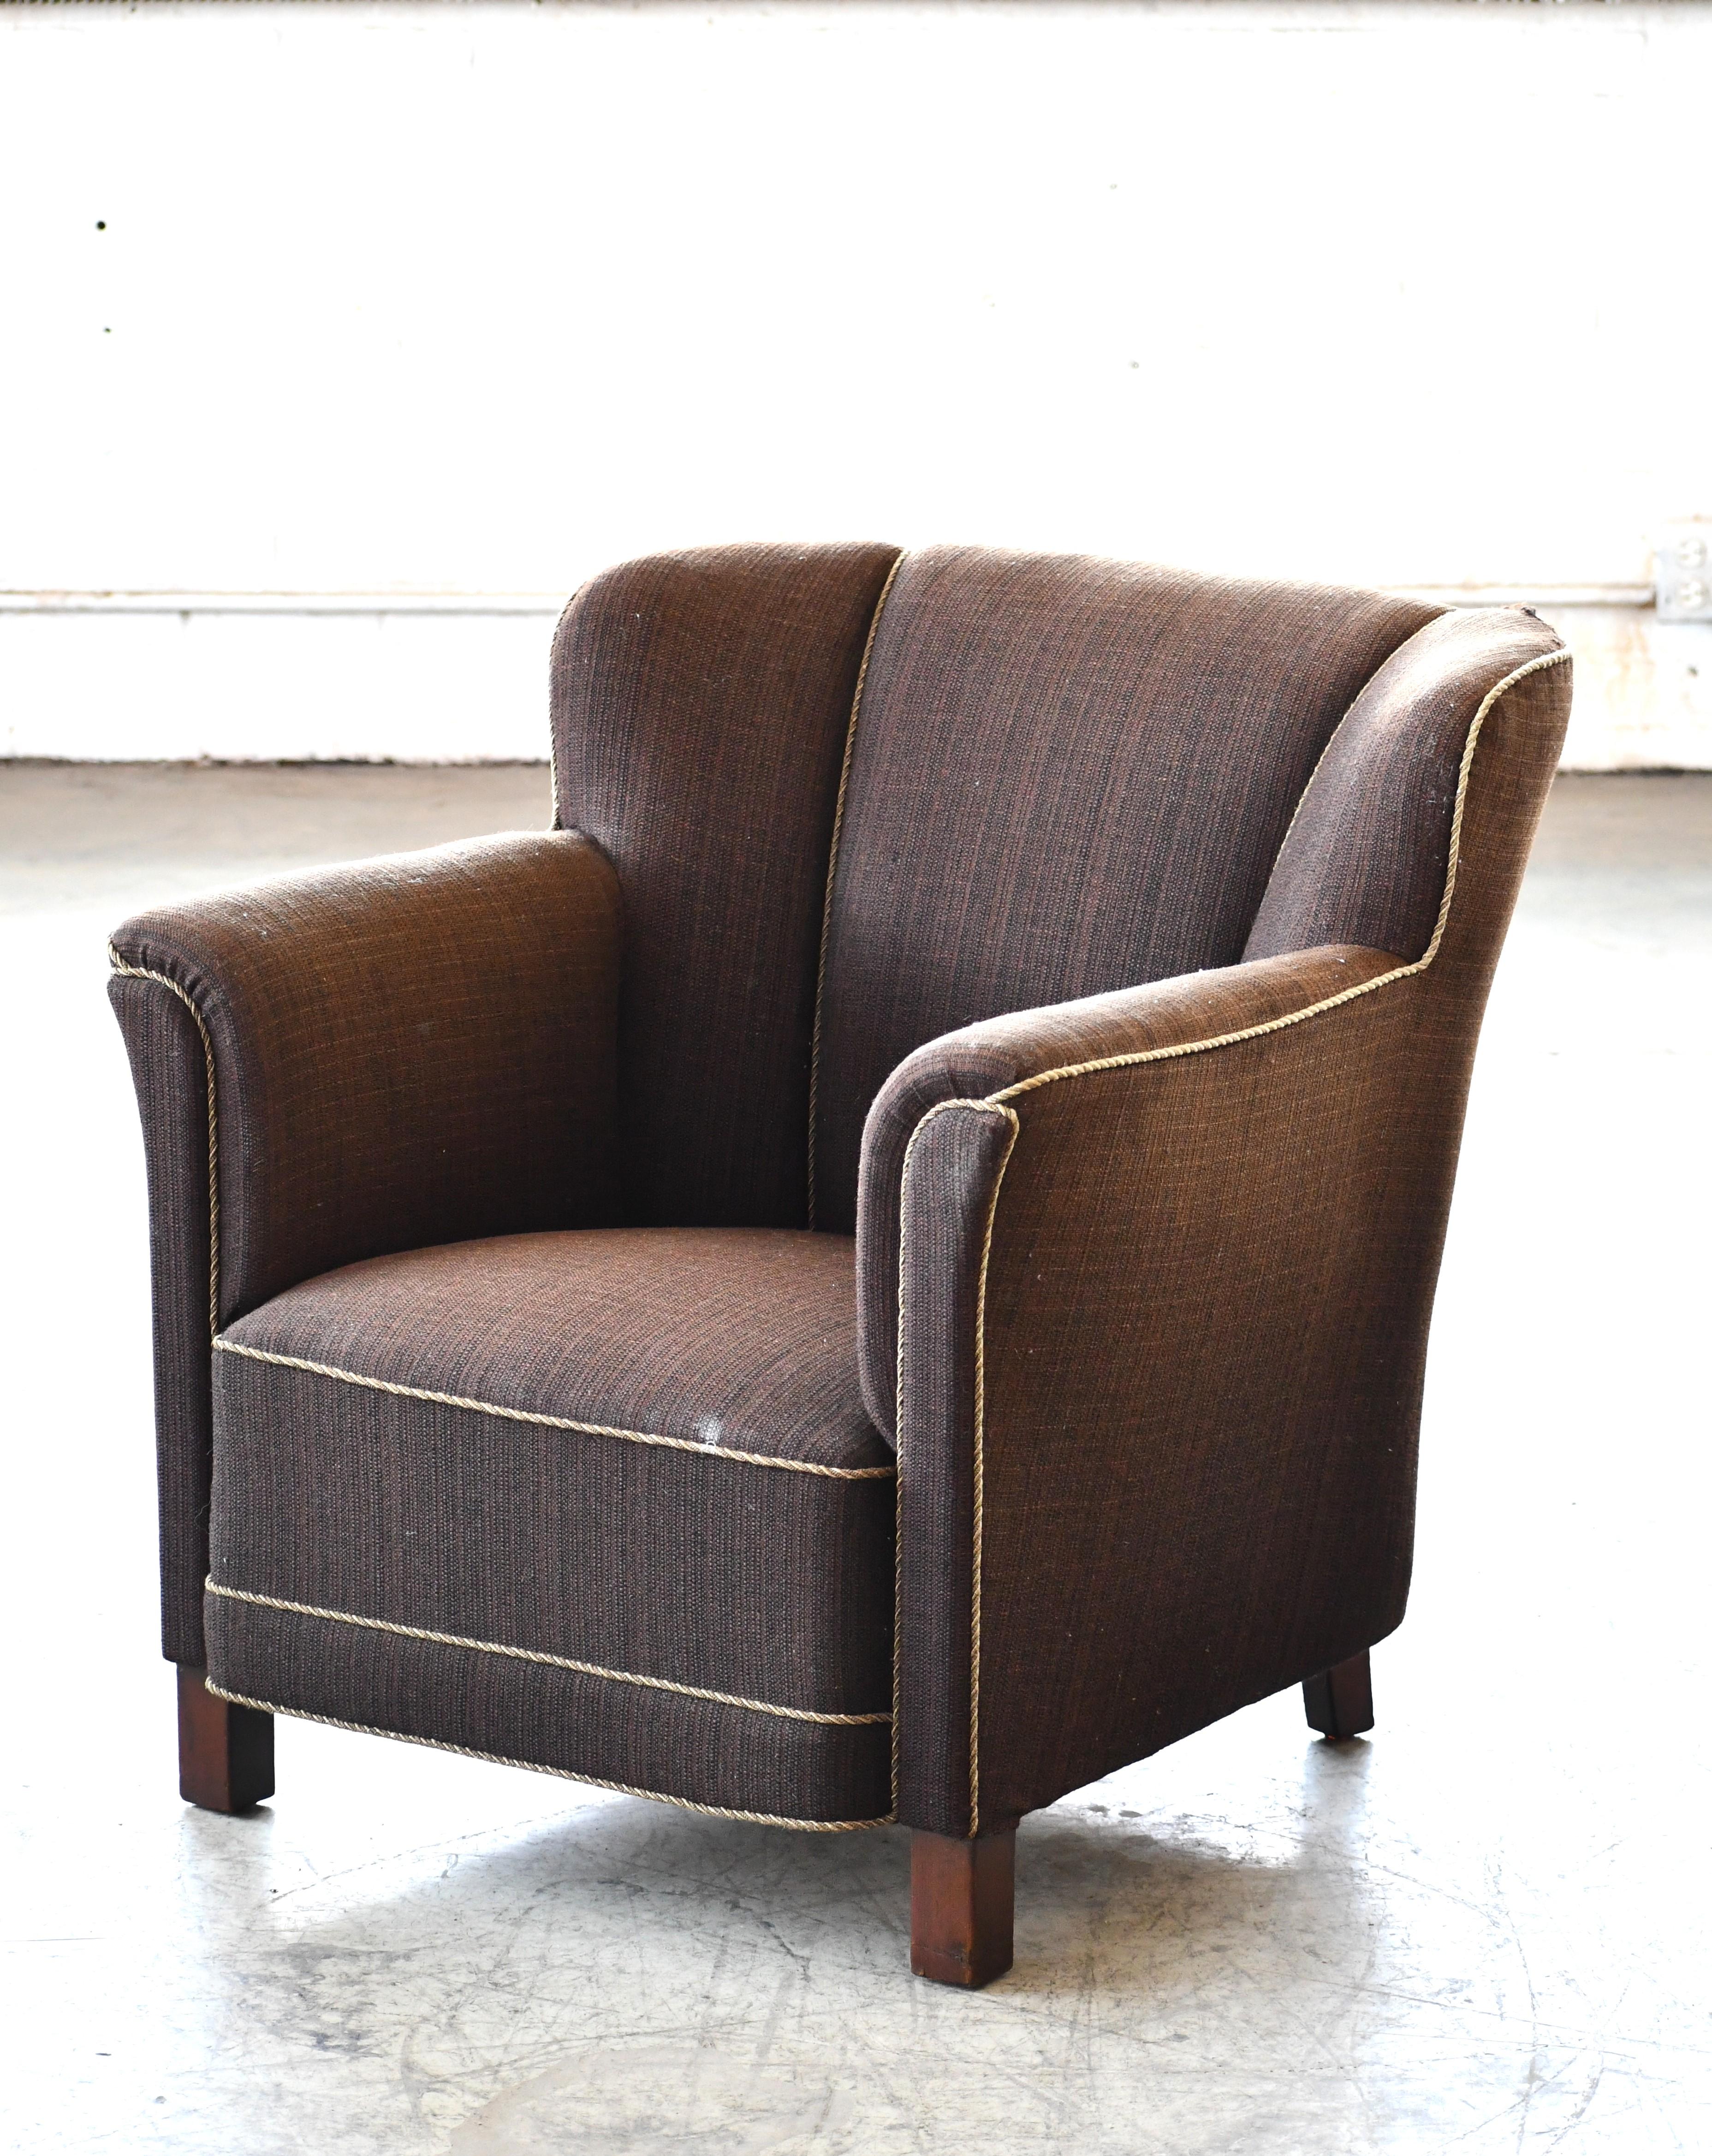 Mid-20th Century  Danish 1950s Lounge or Small Club Chair in Mohair